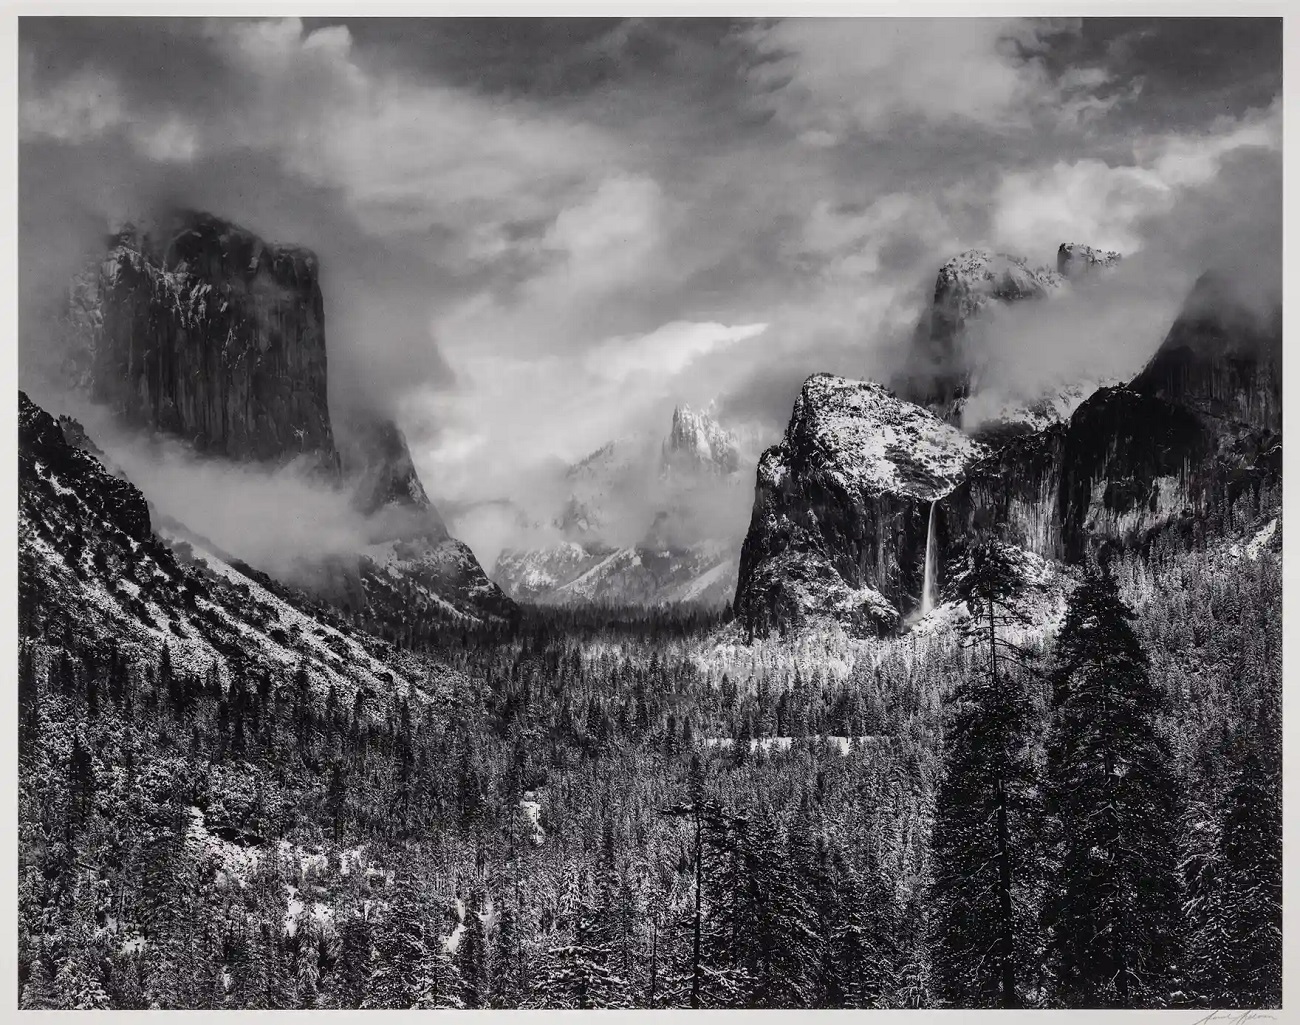 ansel adams, clearing winter storm, yosemite national park, cca 1937. foto ansel adams the ansel adams publishing rights trust